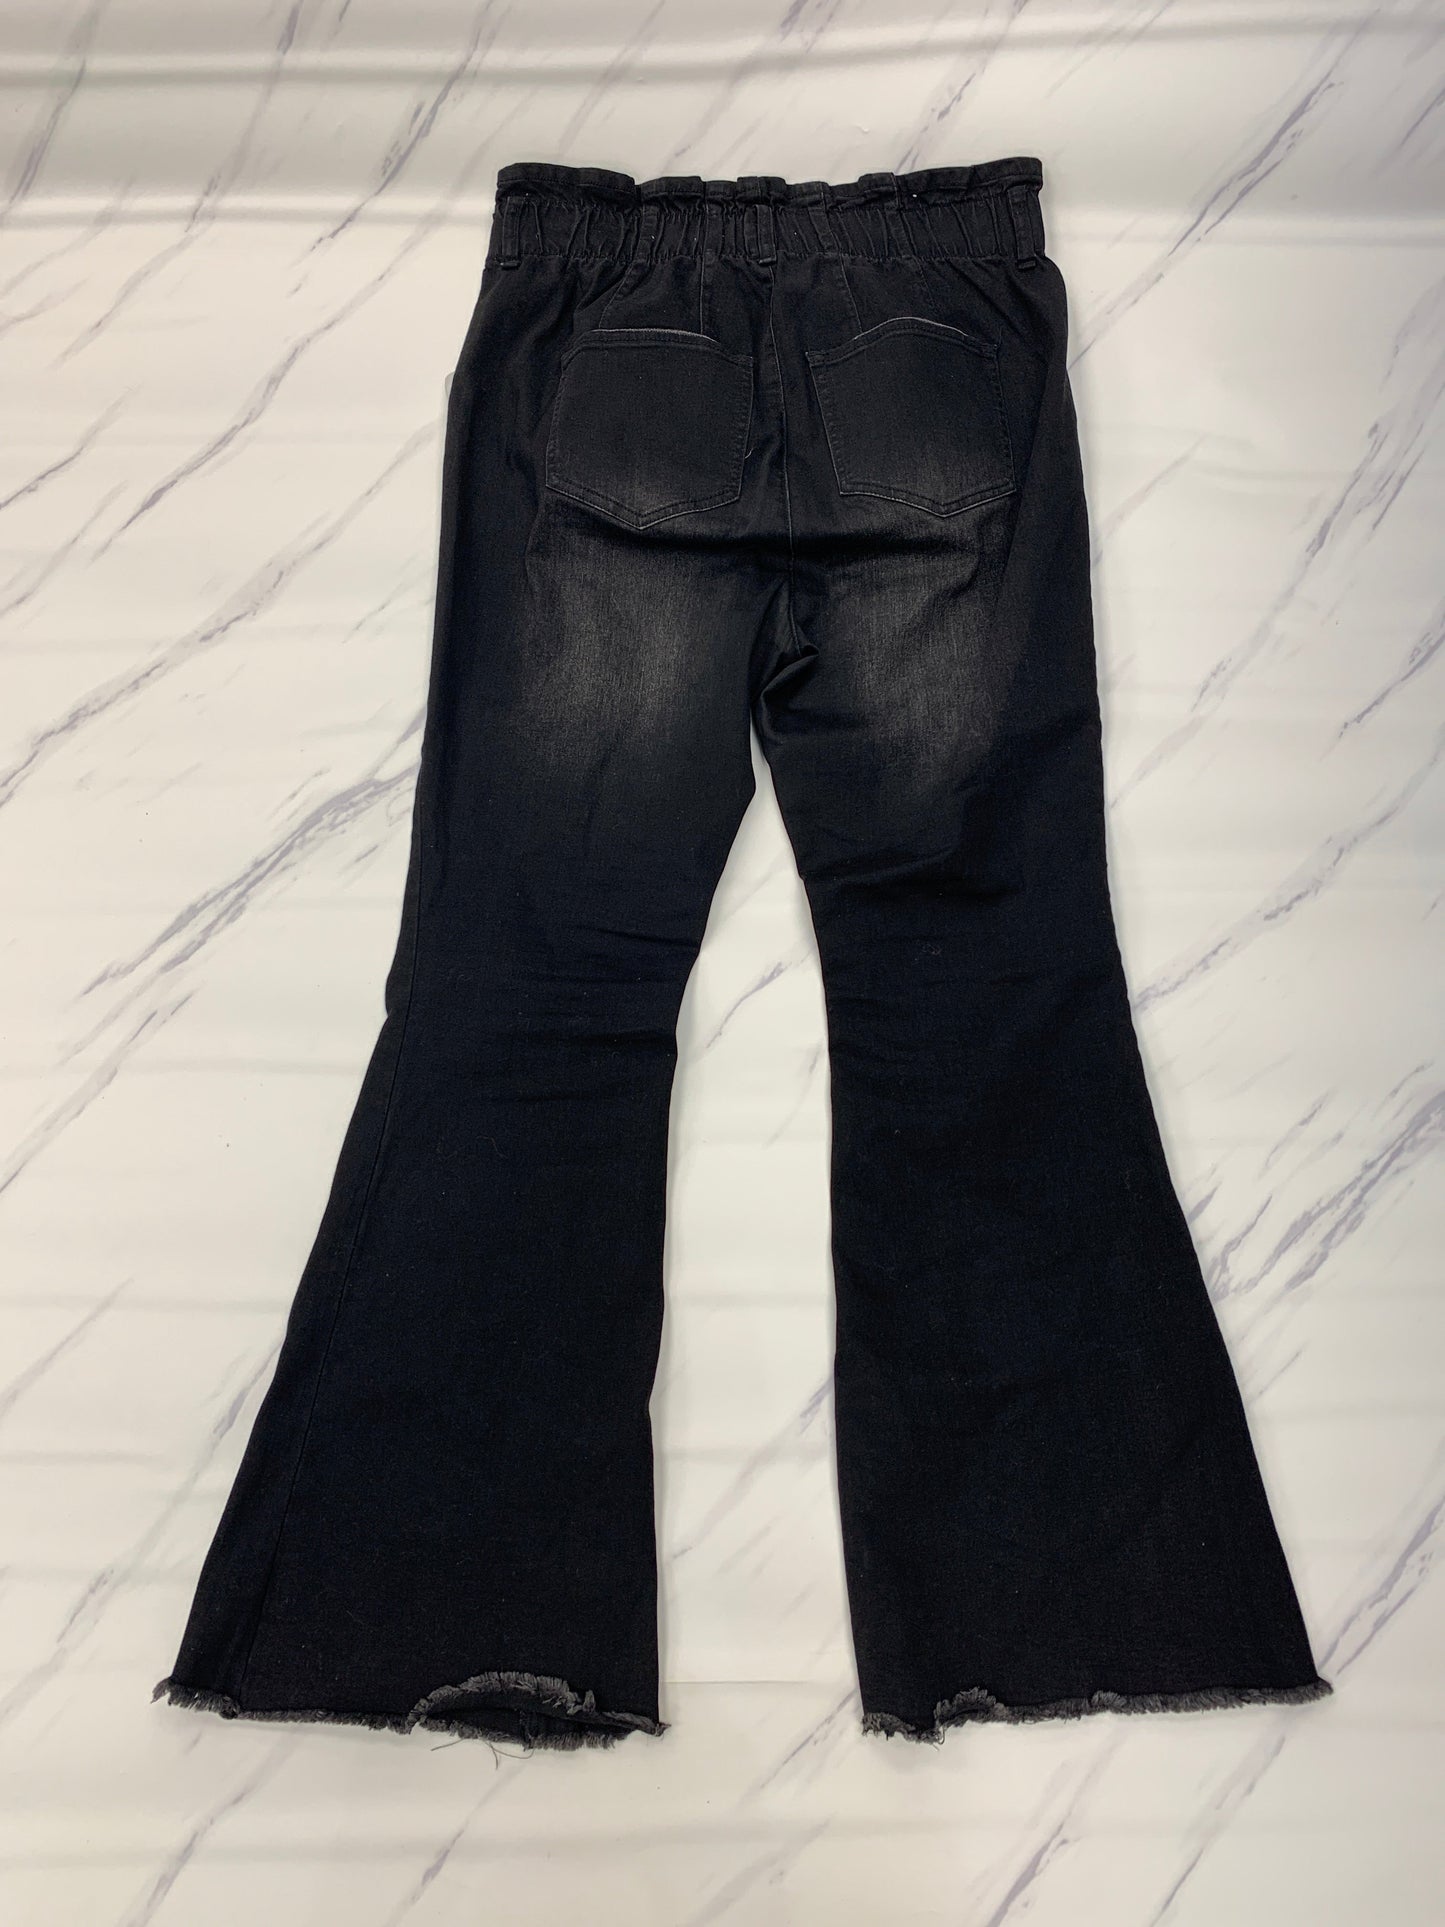 Black Jeans Flared Cmc, Size 10